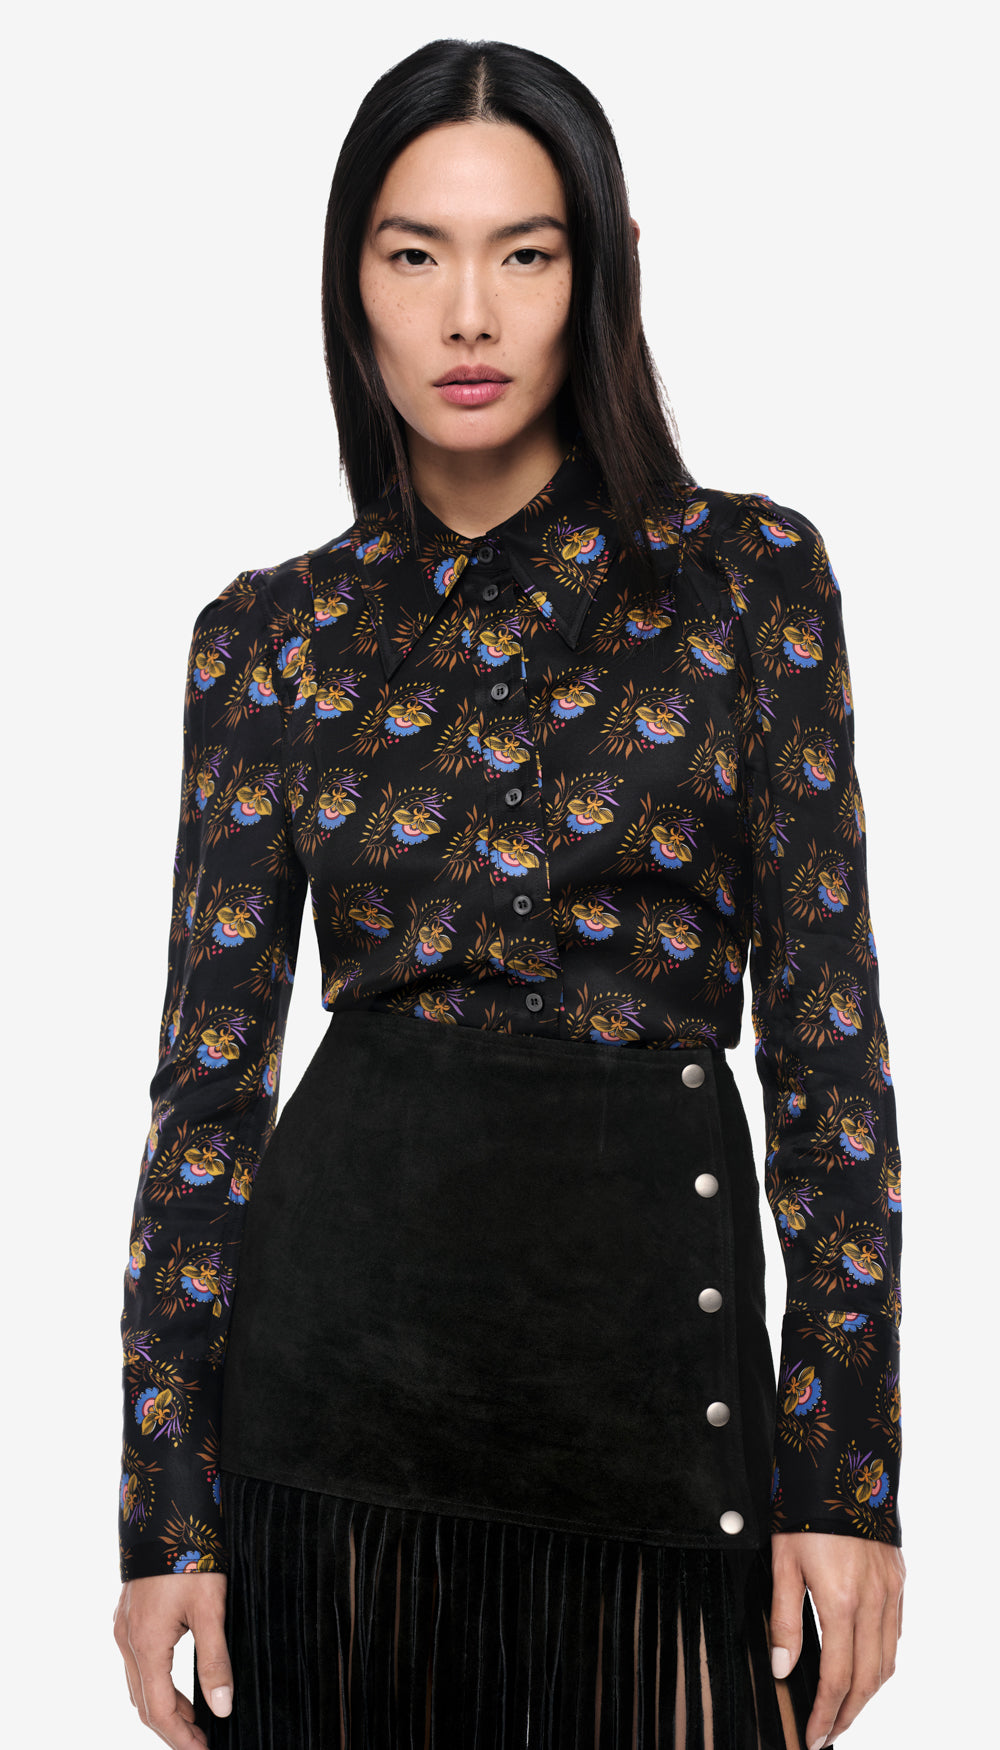 A woman in a black floral blouse.